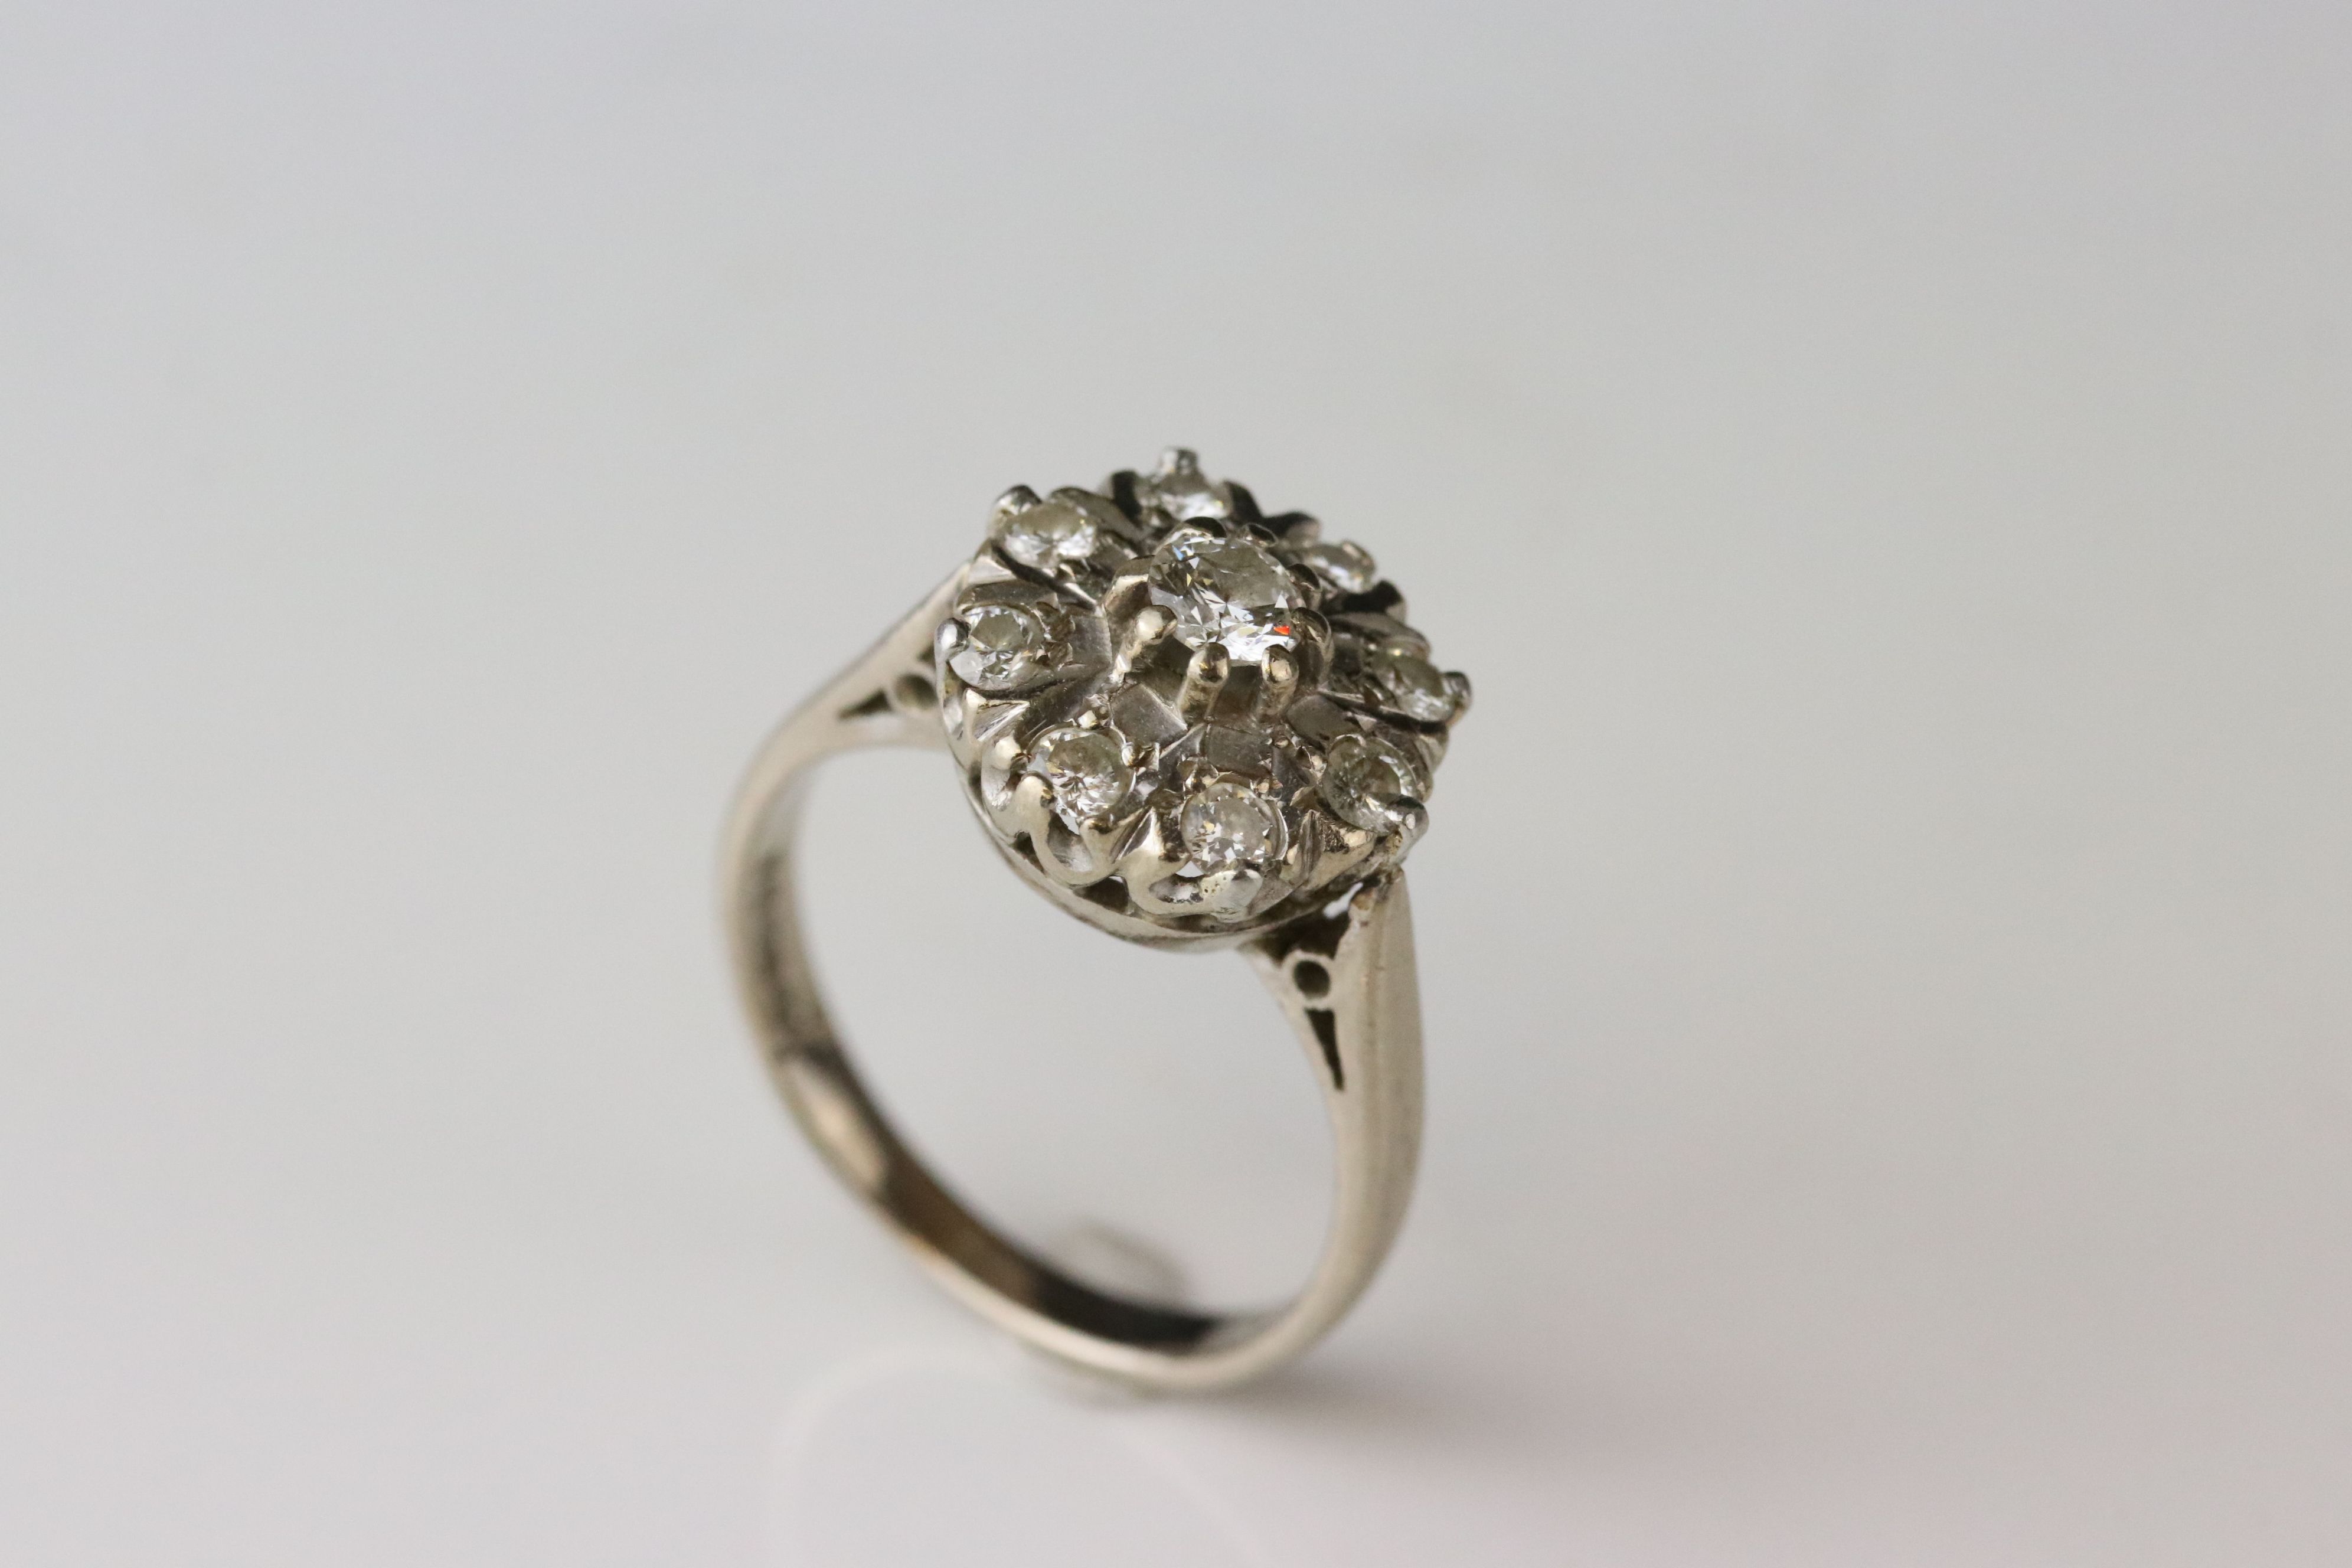 Diamond 18ct white gold cluster ring, principle round brilliant cut diamond weighing approx 0.20